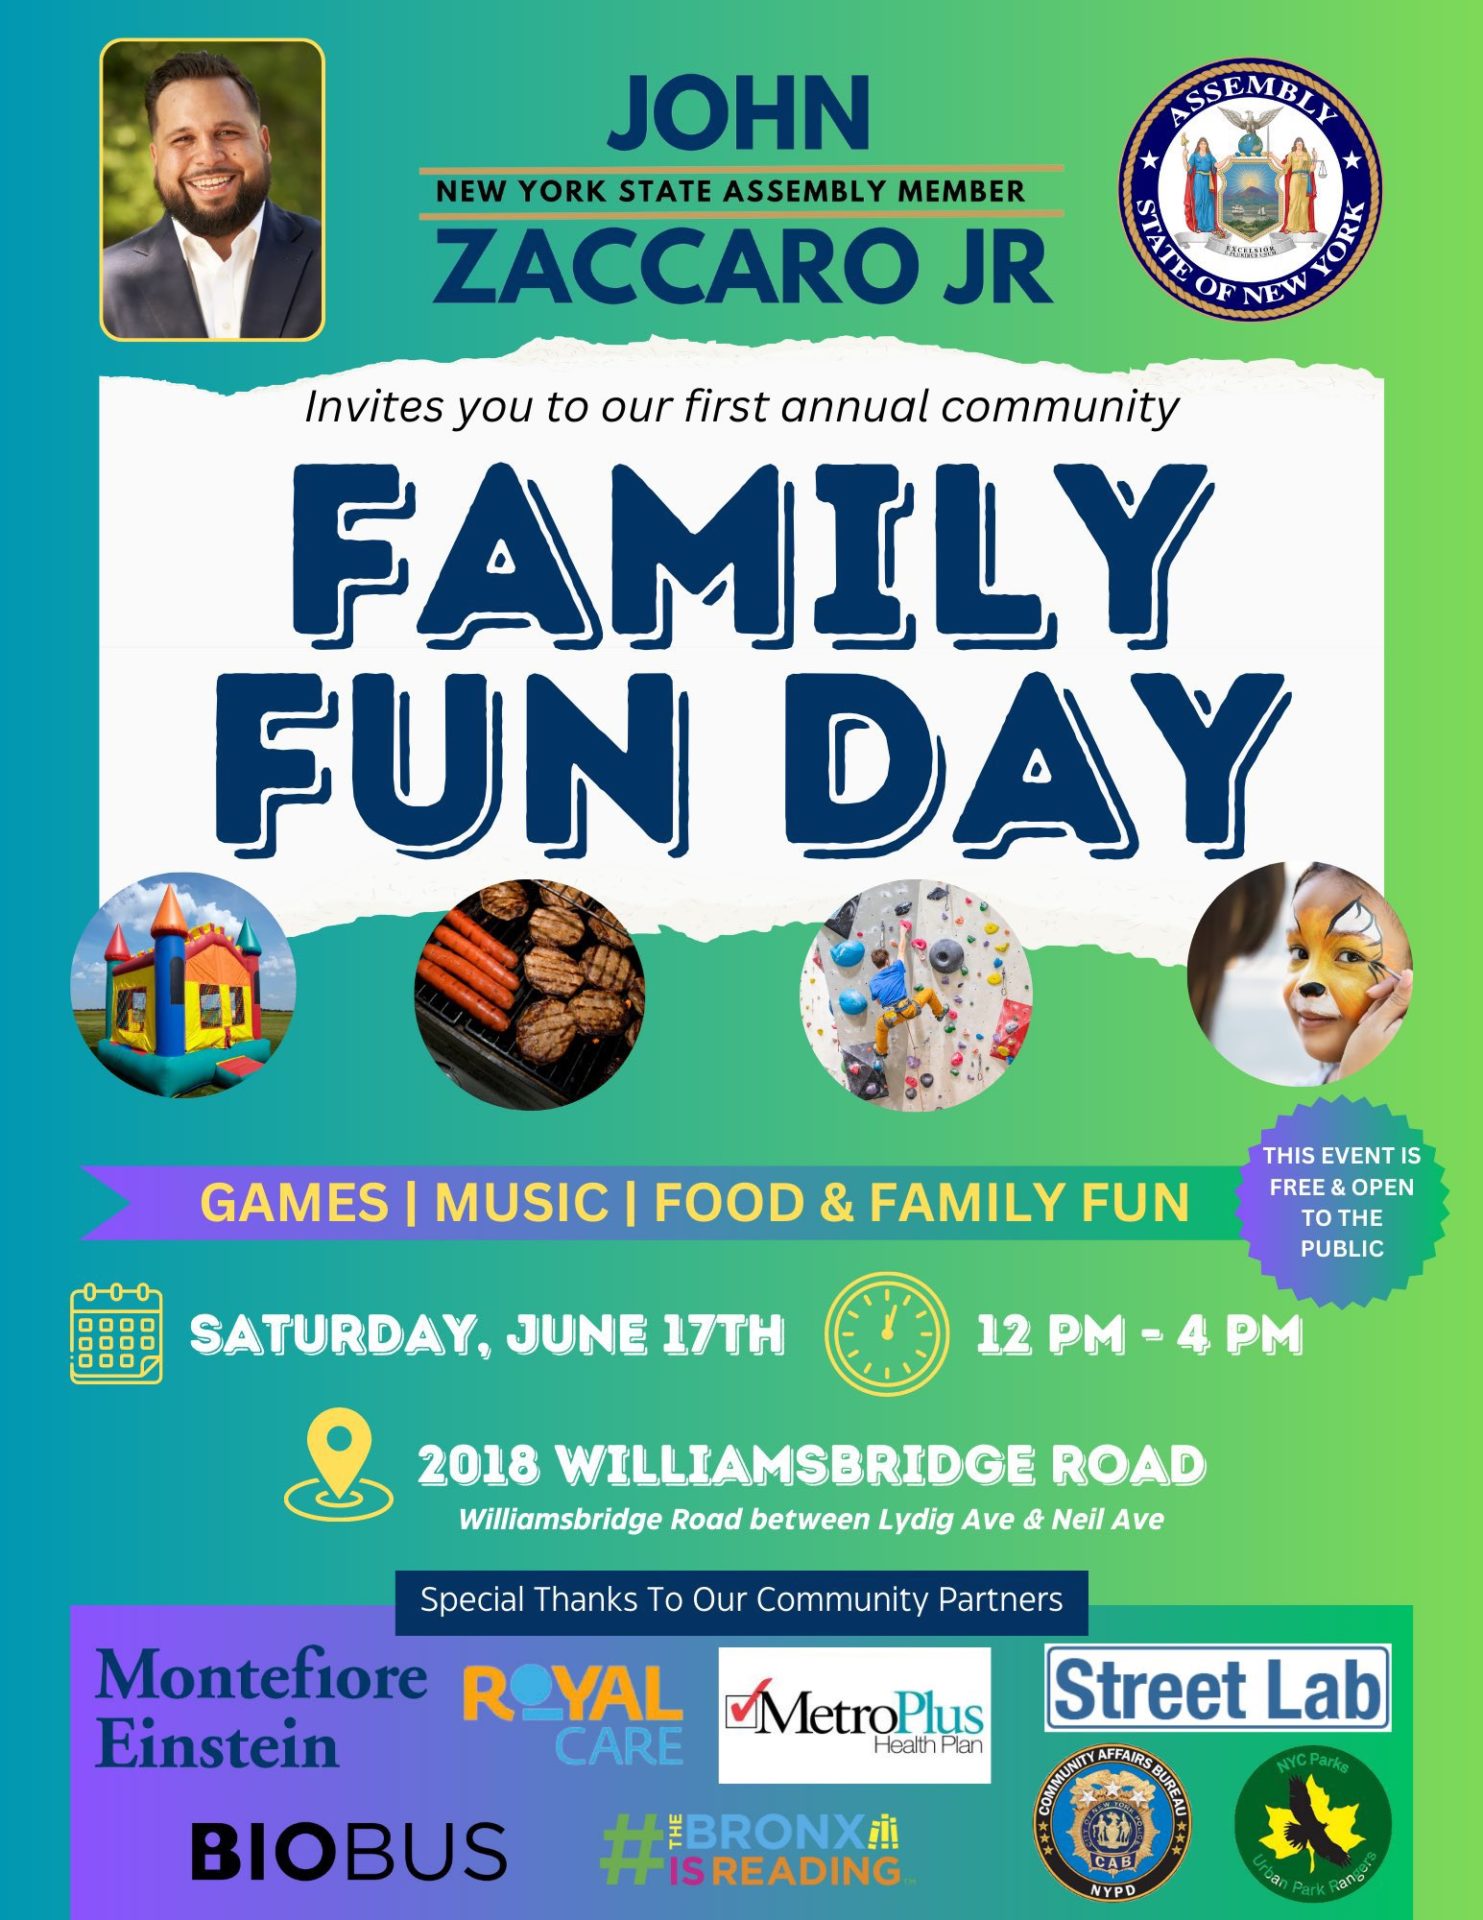 Mobile Lab at AM Zaccaro Jr.'s Family Fun Day in the Bronx